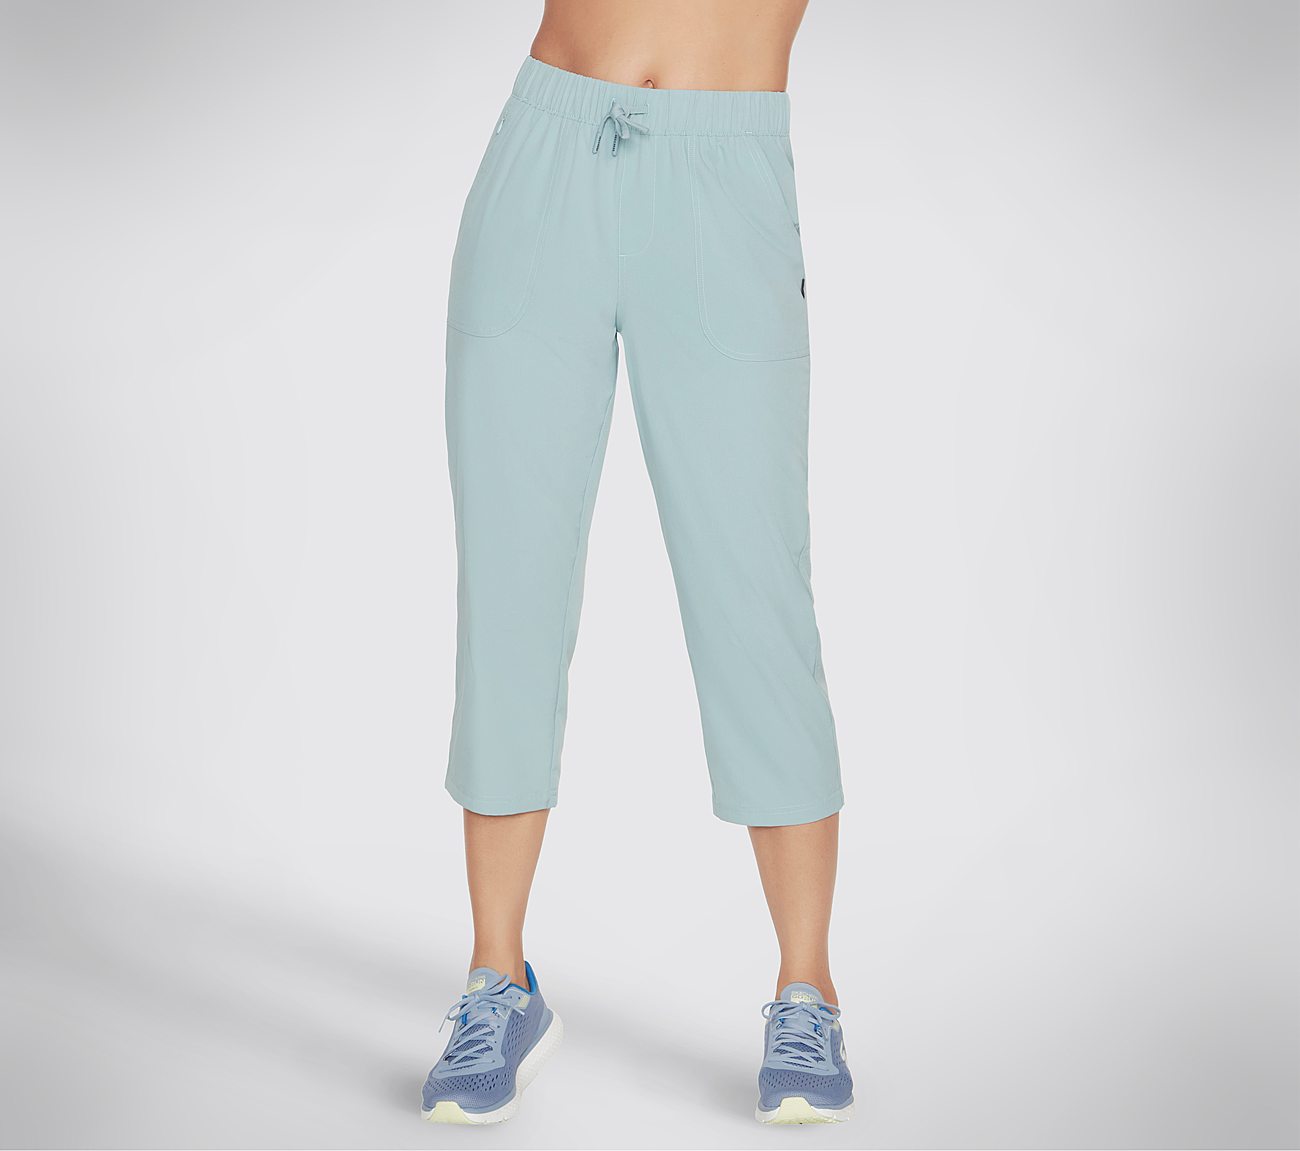 All in Motion Women's Snow Pants (Indigo Blue, X-Small)